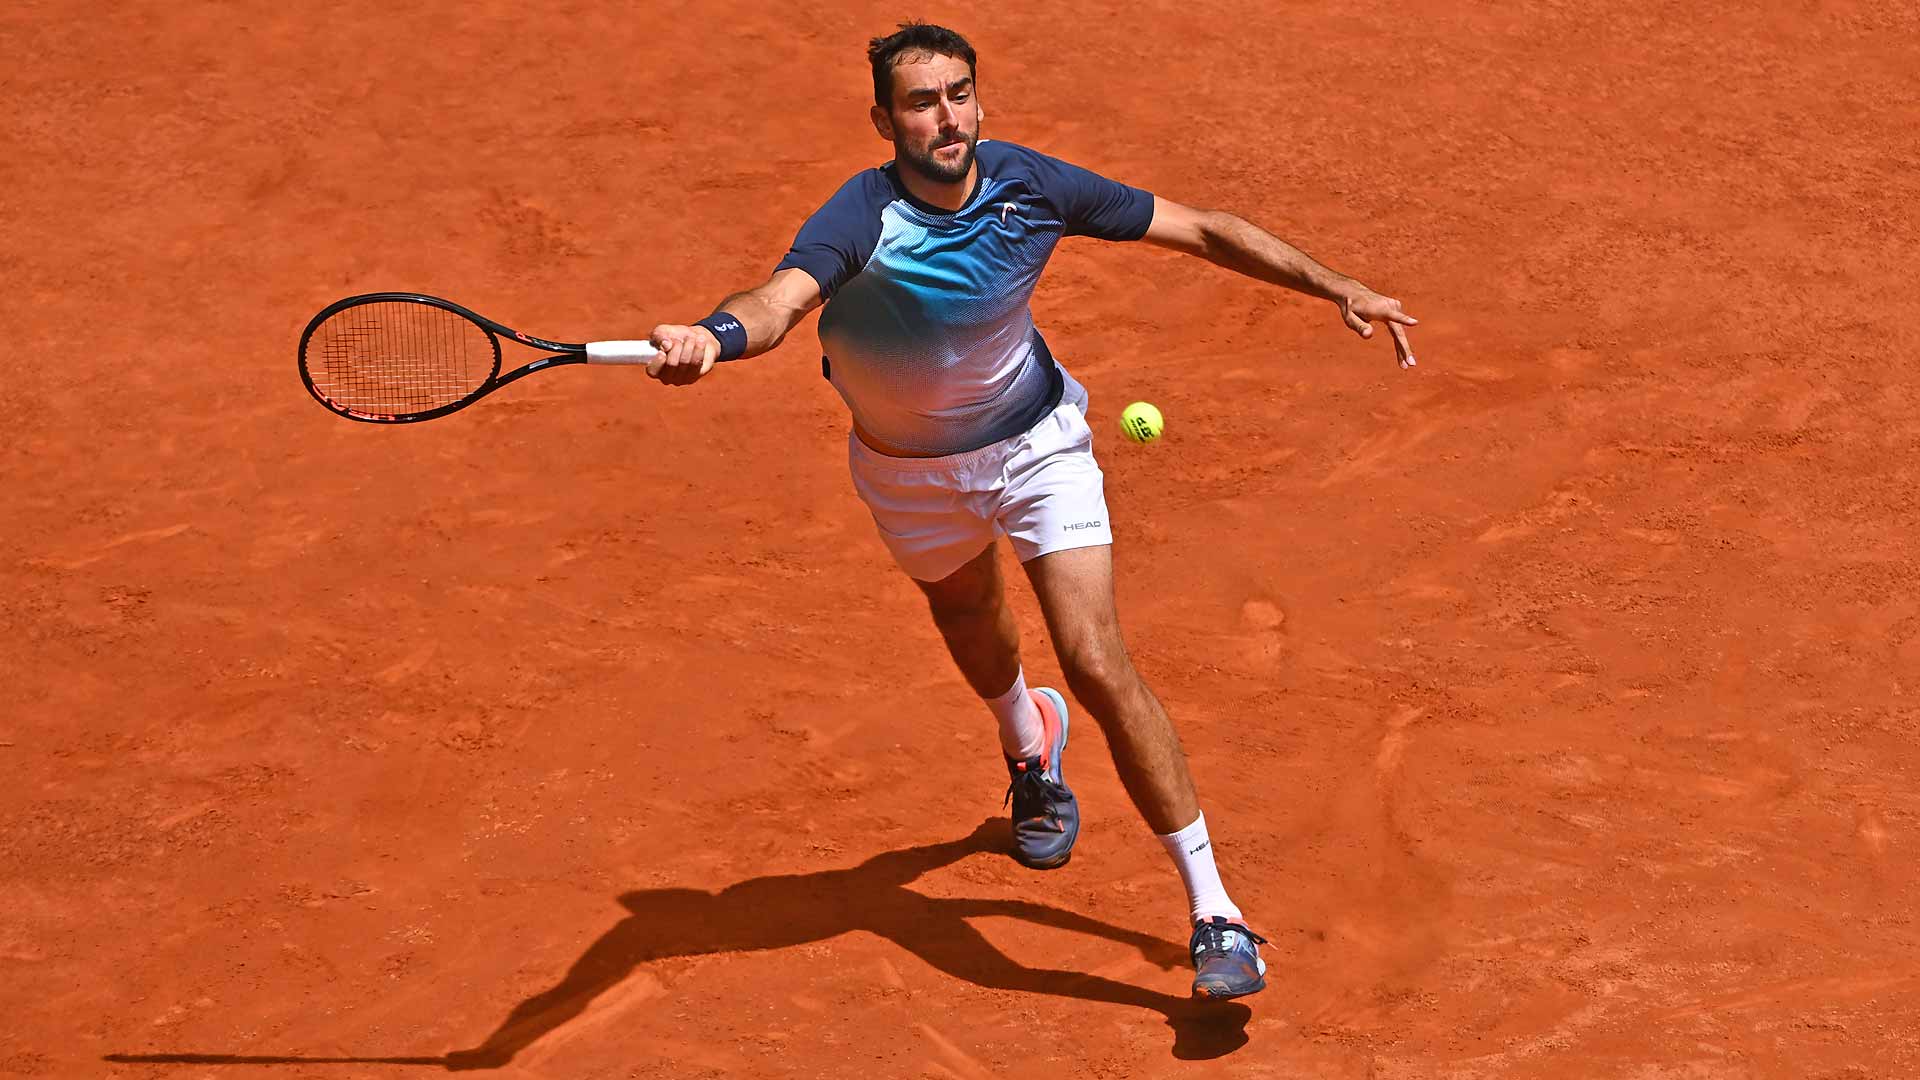 Cilic undergoes knee surgery: ‘I am motivated to get back’